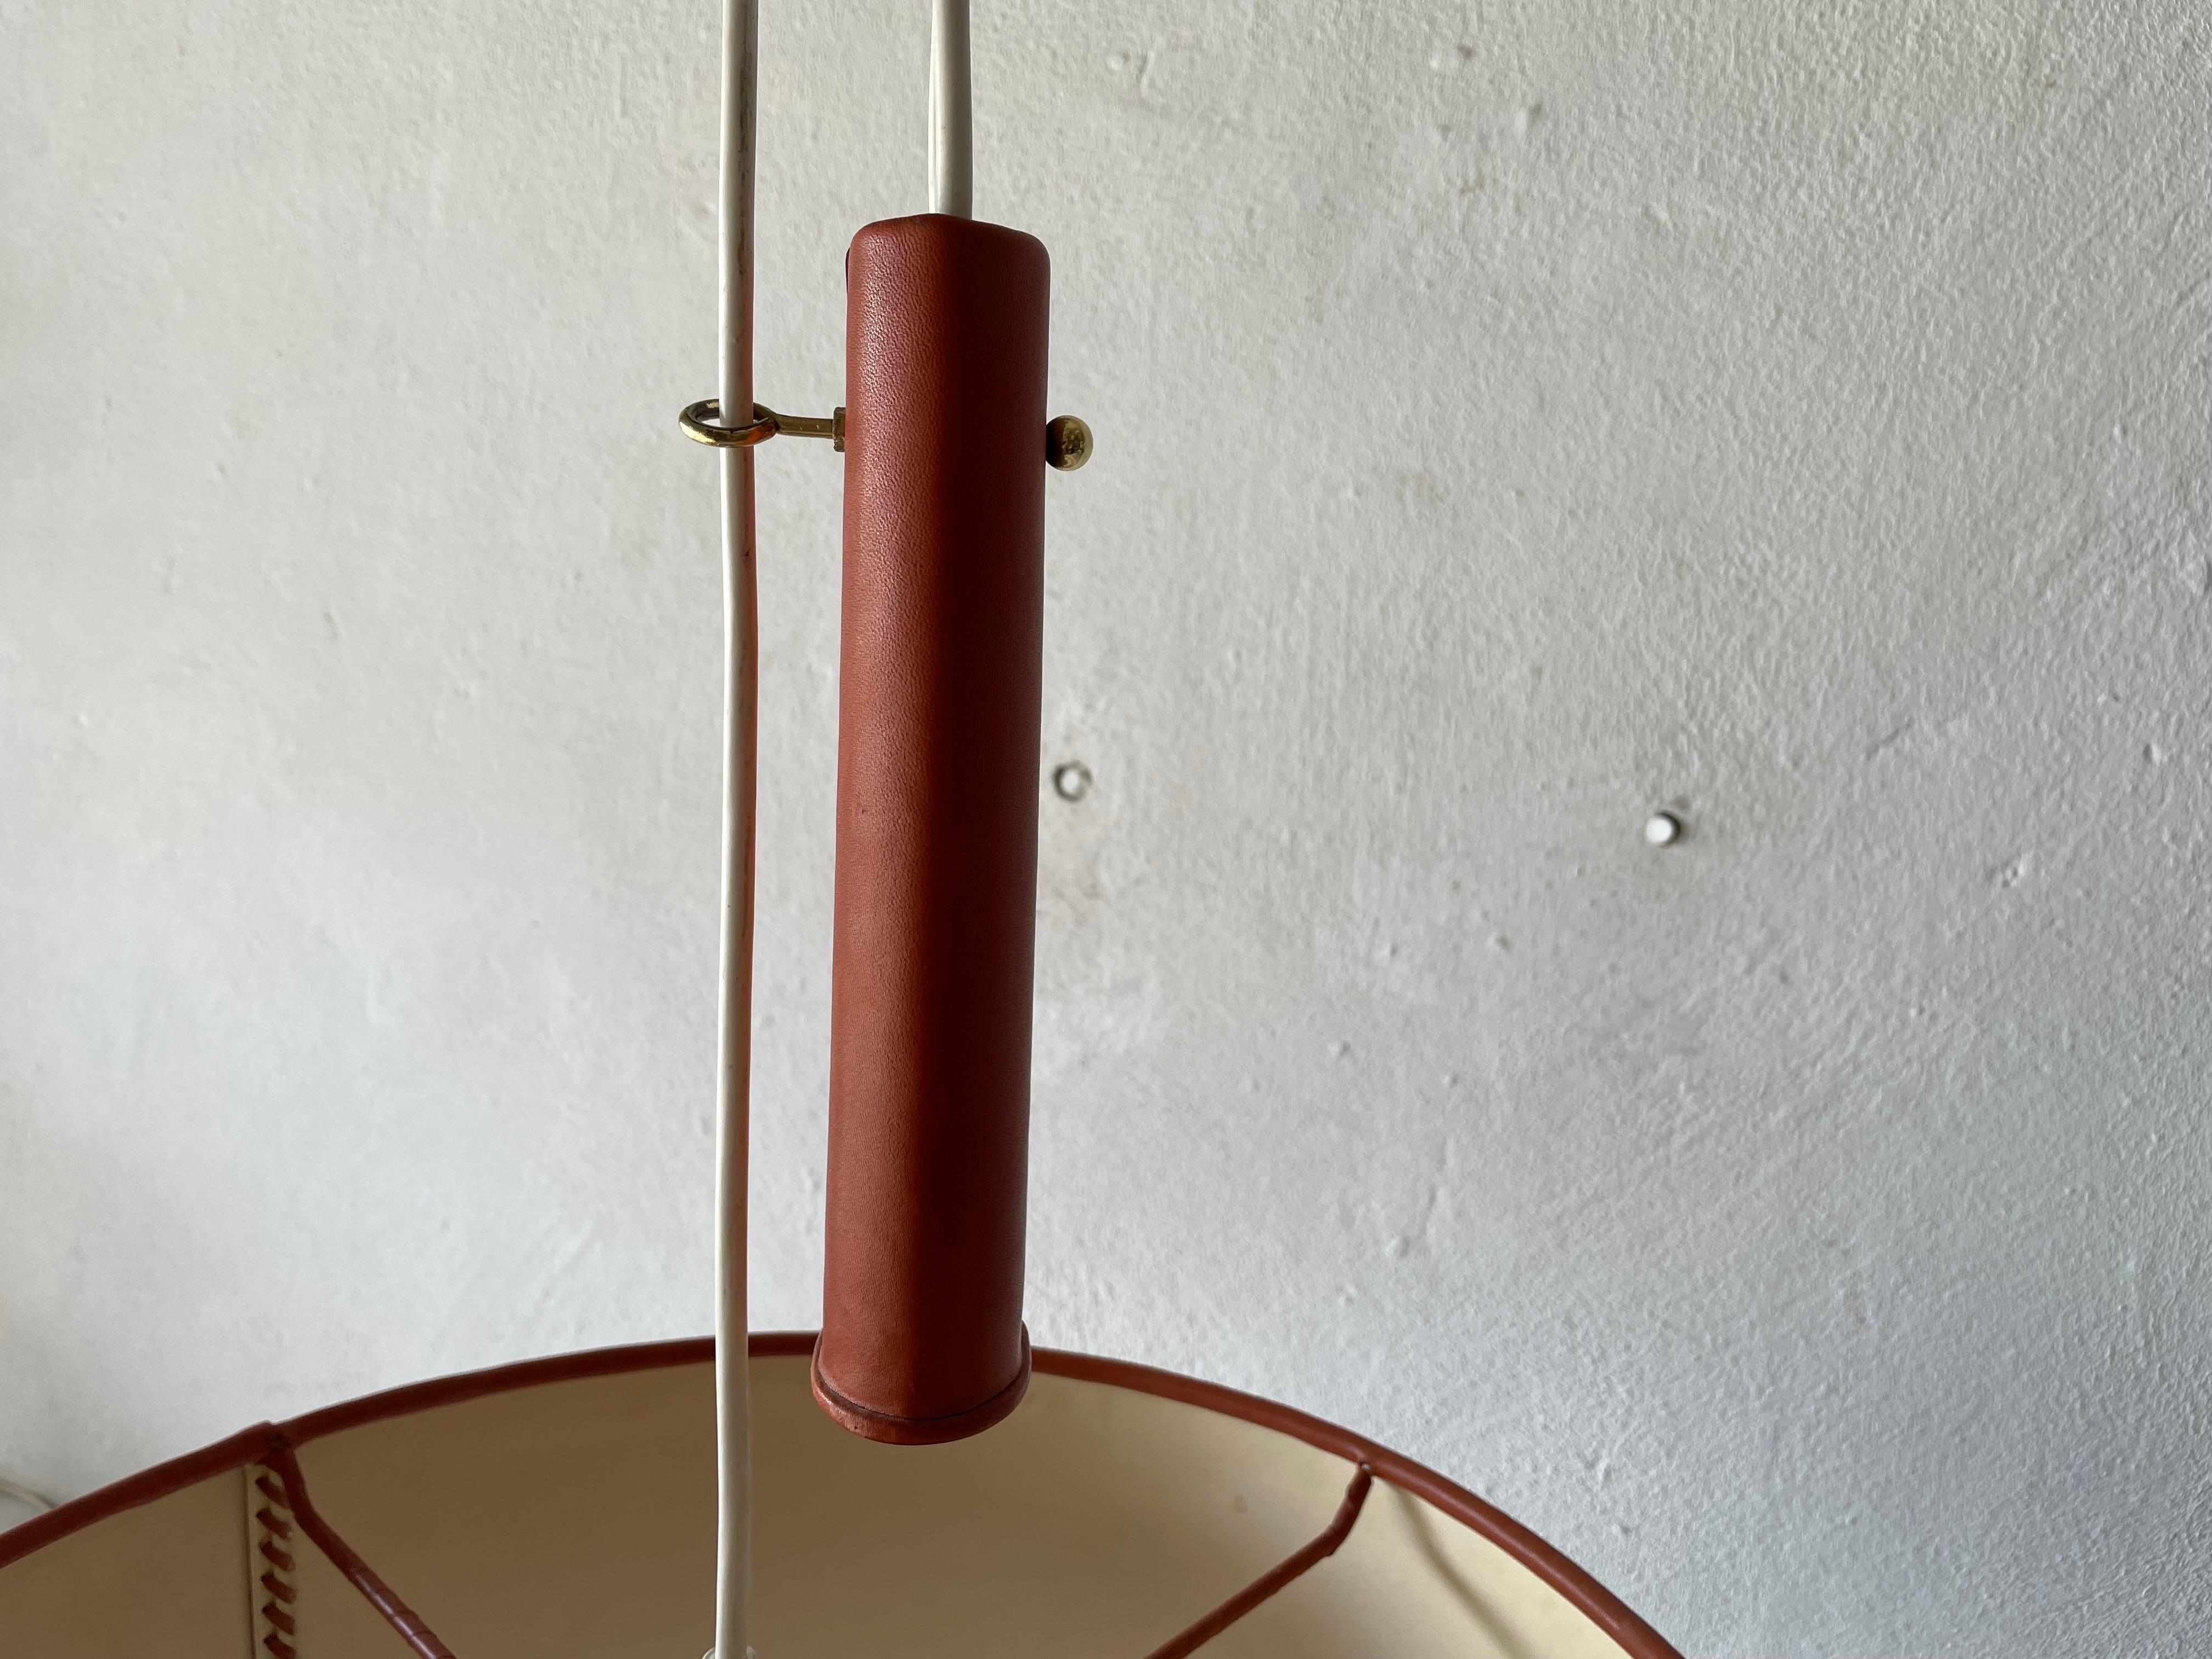 Cylindrical Leather Shade with Motifs Counterweight Pendant Lamp, 1960s, Germany For Sale 3